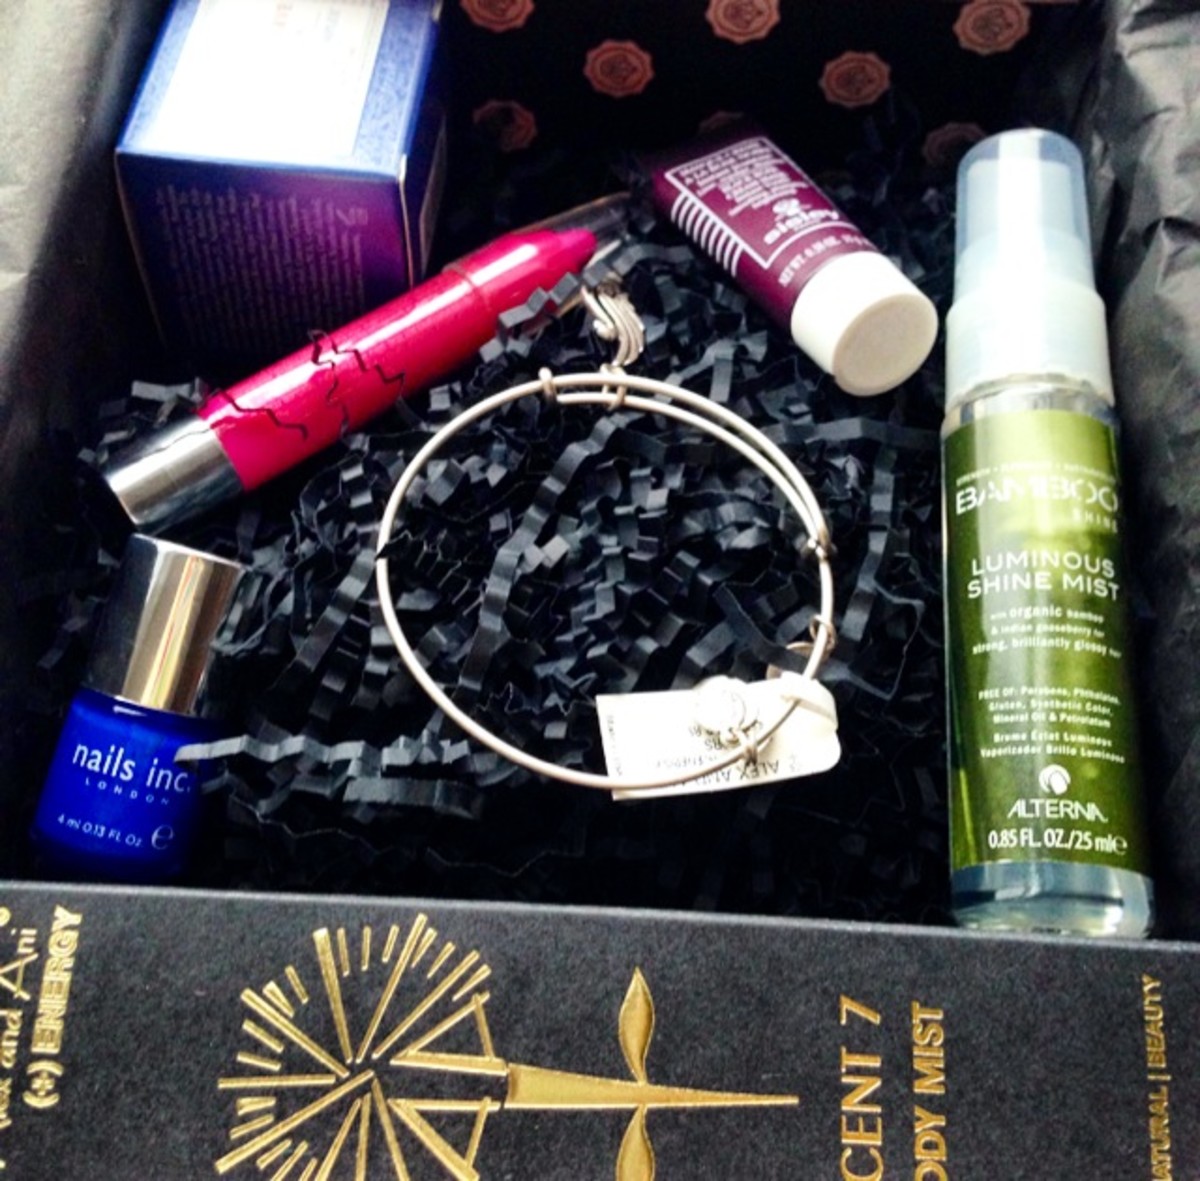 The March 2014 Glossybox.